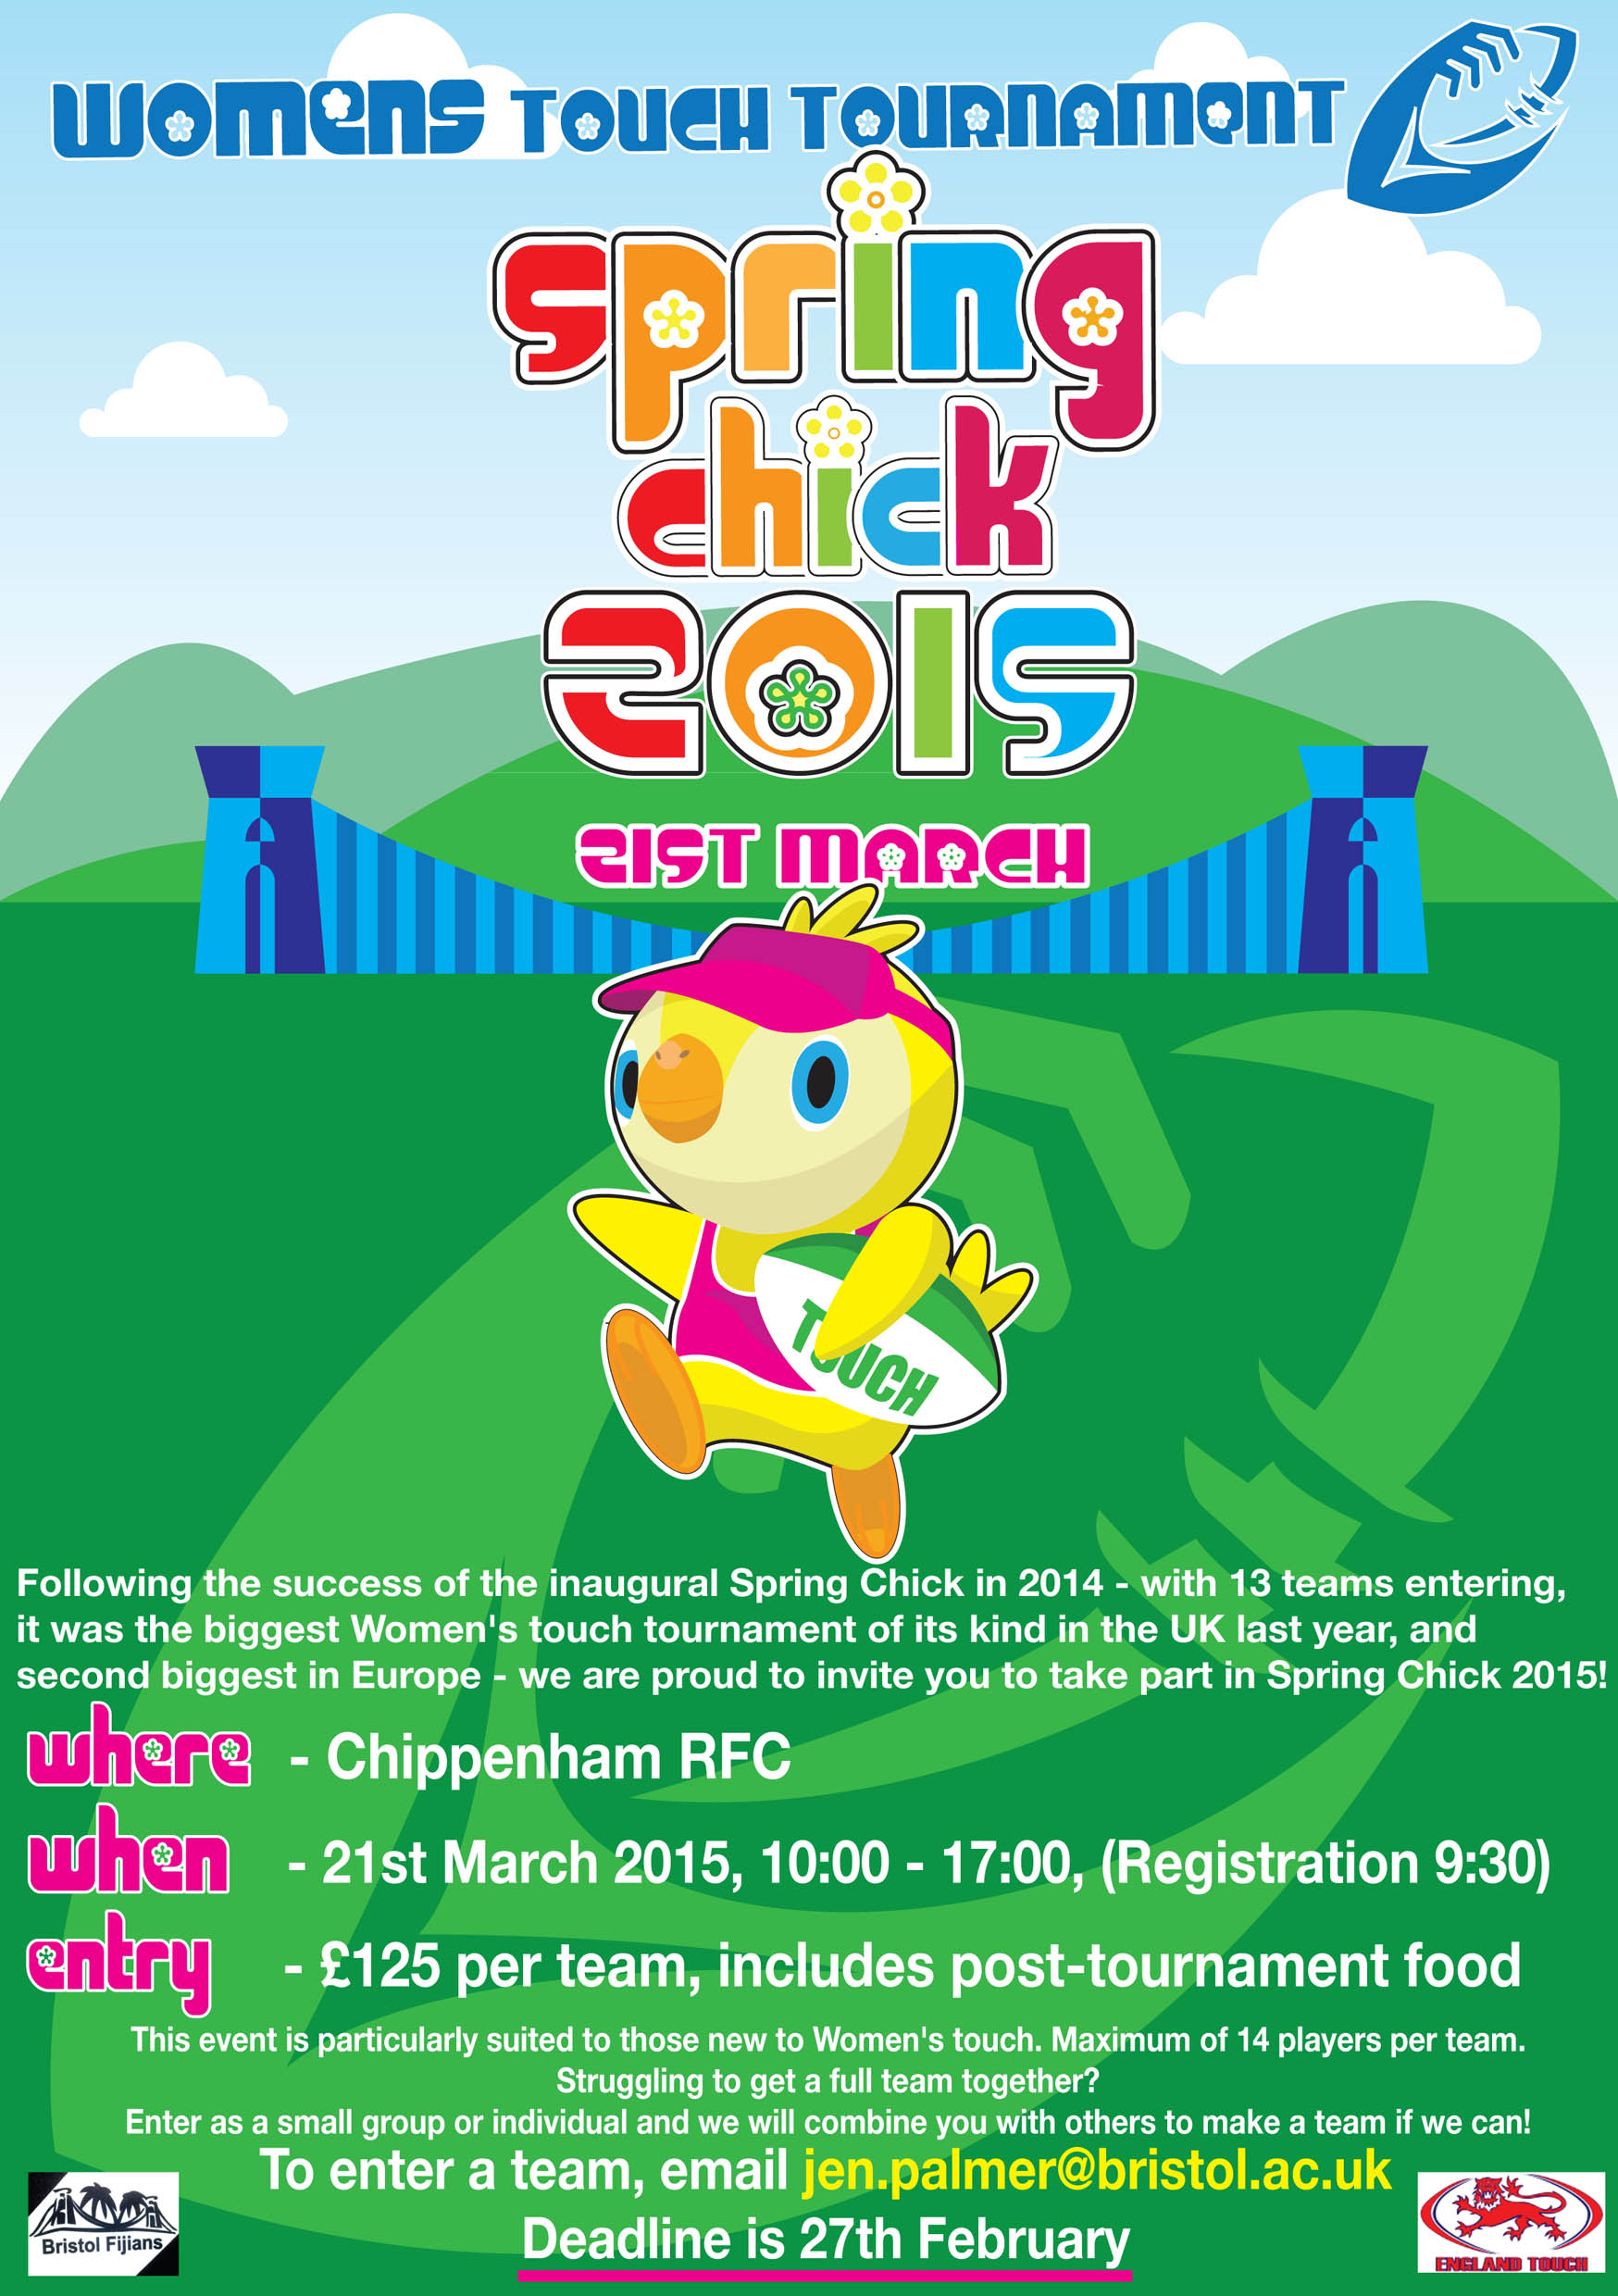 The Spring Chick 2015